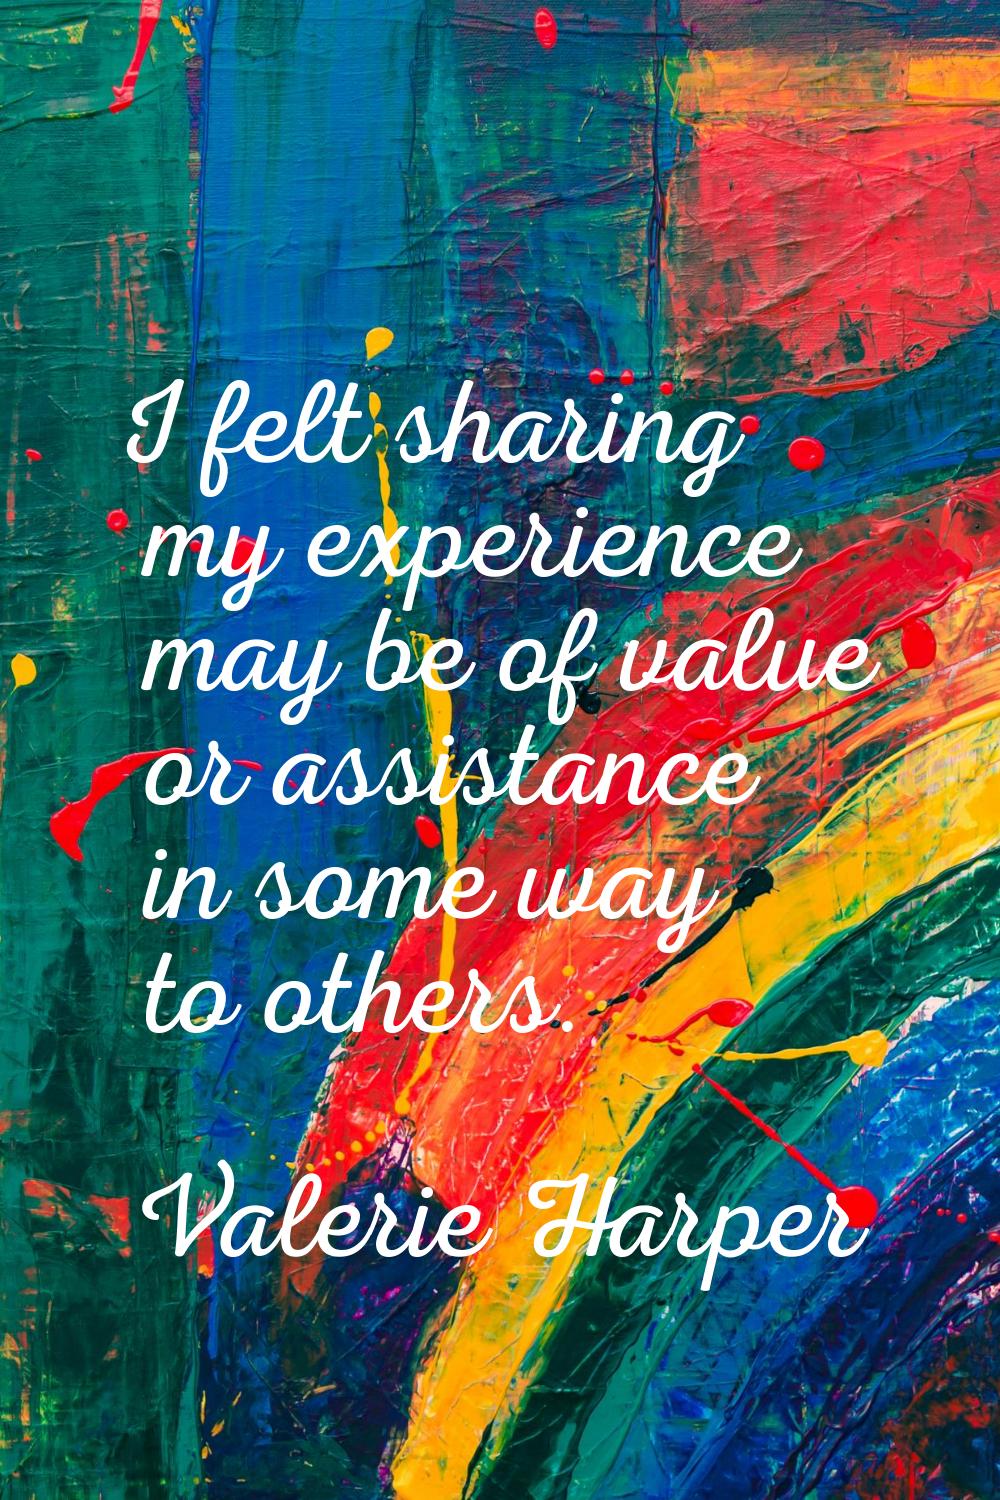 I felt sharing my experience may be of value or assistance in some way to others.